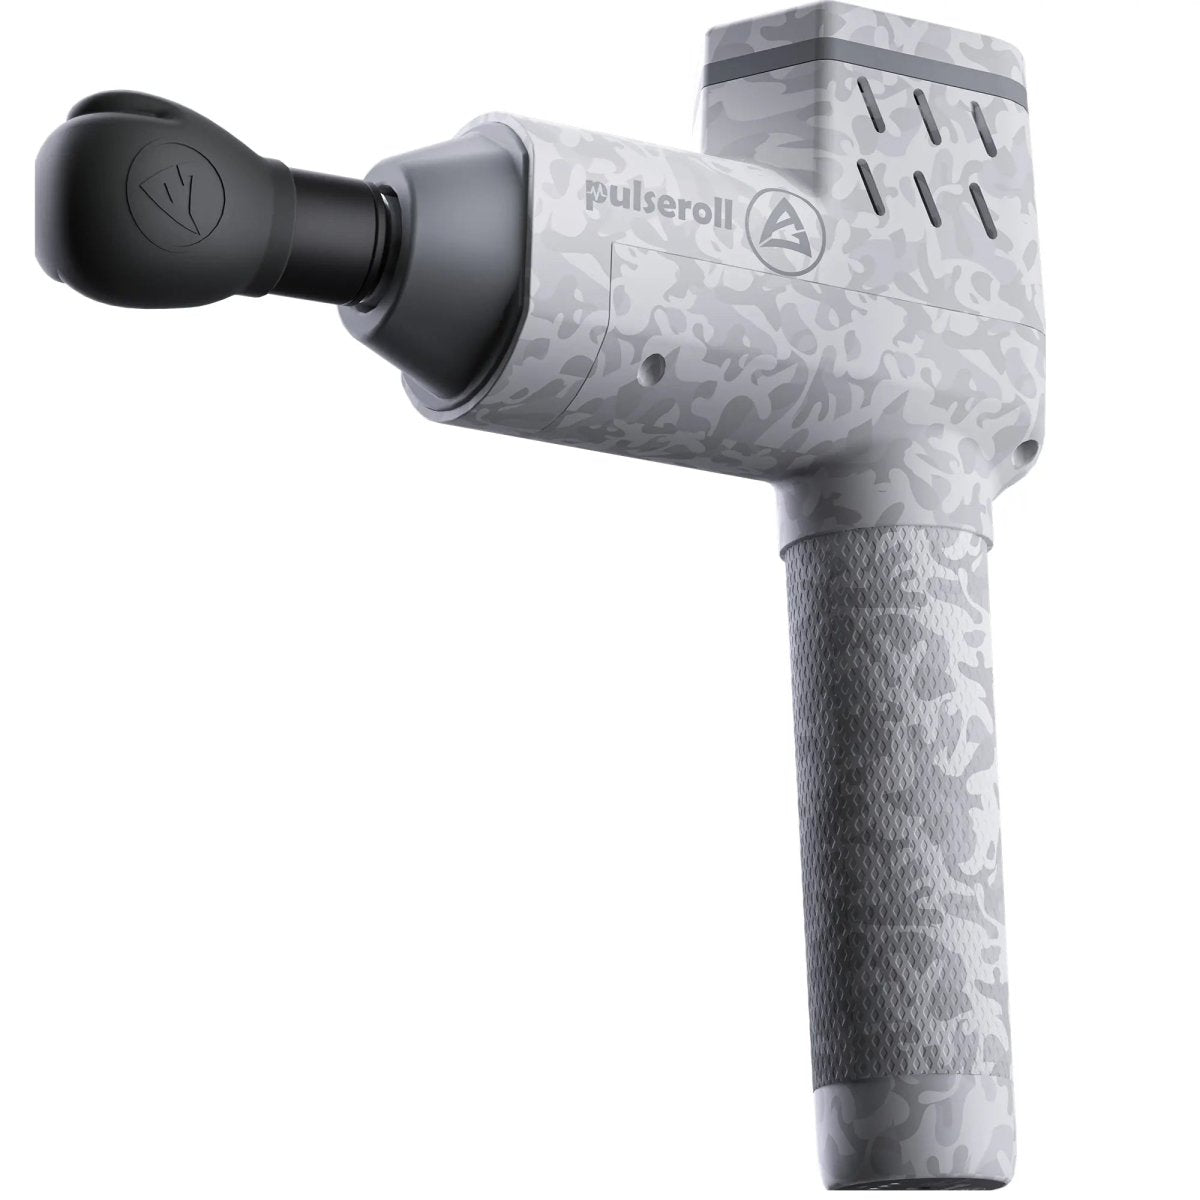 Percussion Massage Gun - All In Motion™ : Target